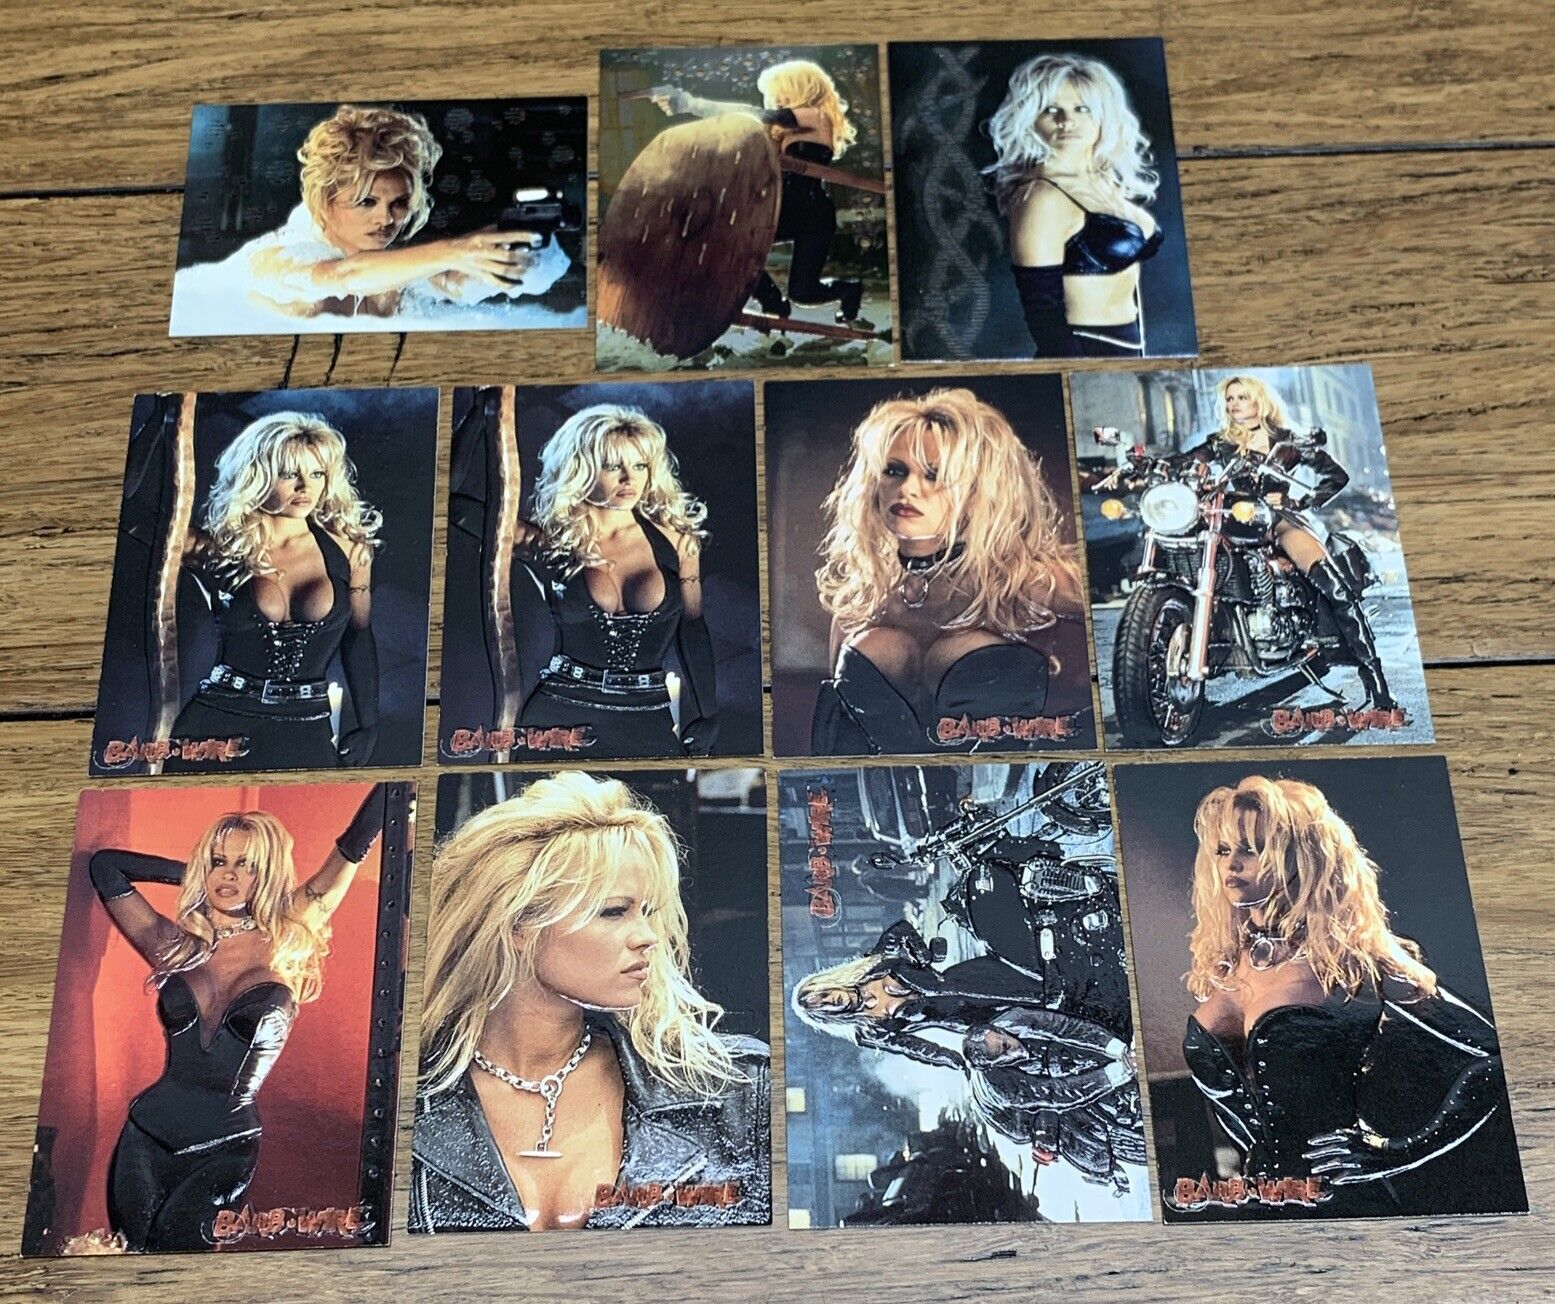 1996 Topps Barb-Wire Laser Cut Embossed Insert Card Of 11 Rare Chase Cards CV JD